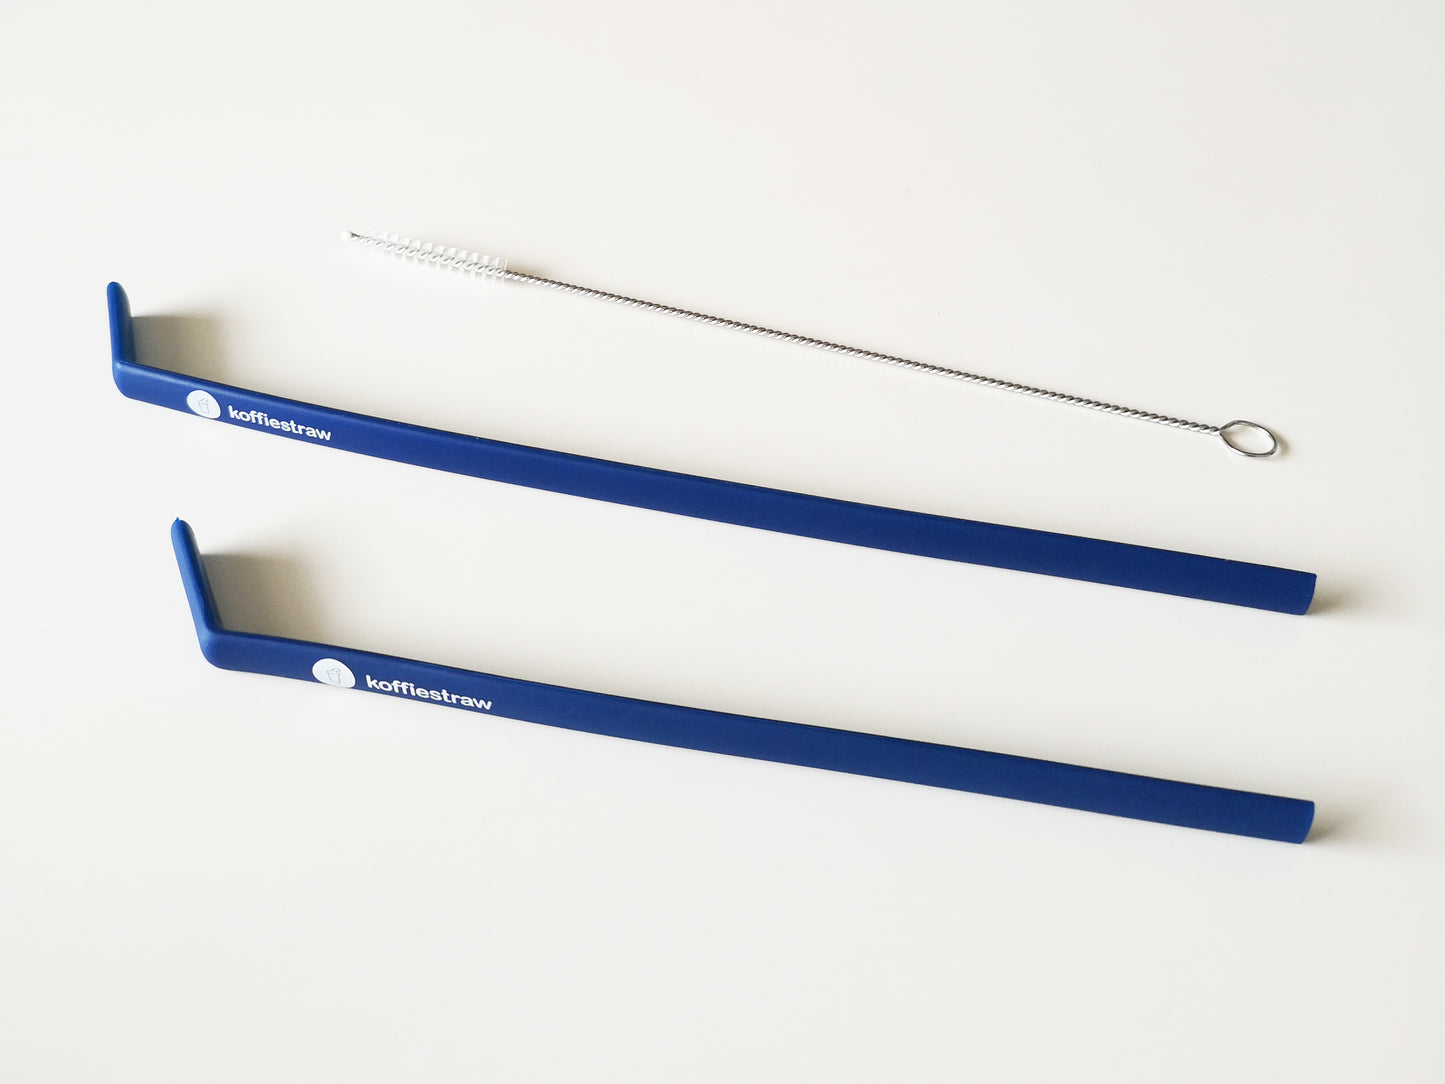 2 Pack of Navy KoffieStraws: Navy 10" + Navy 8" with stainless steel cleaning brush in home-composable packaging